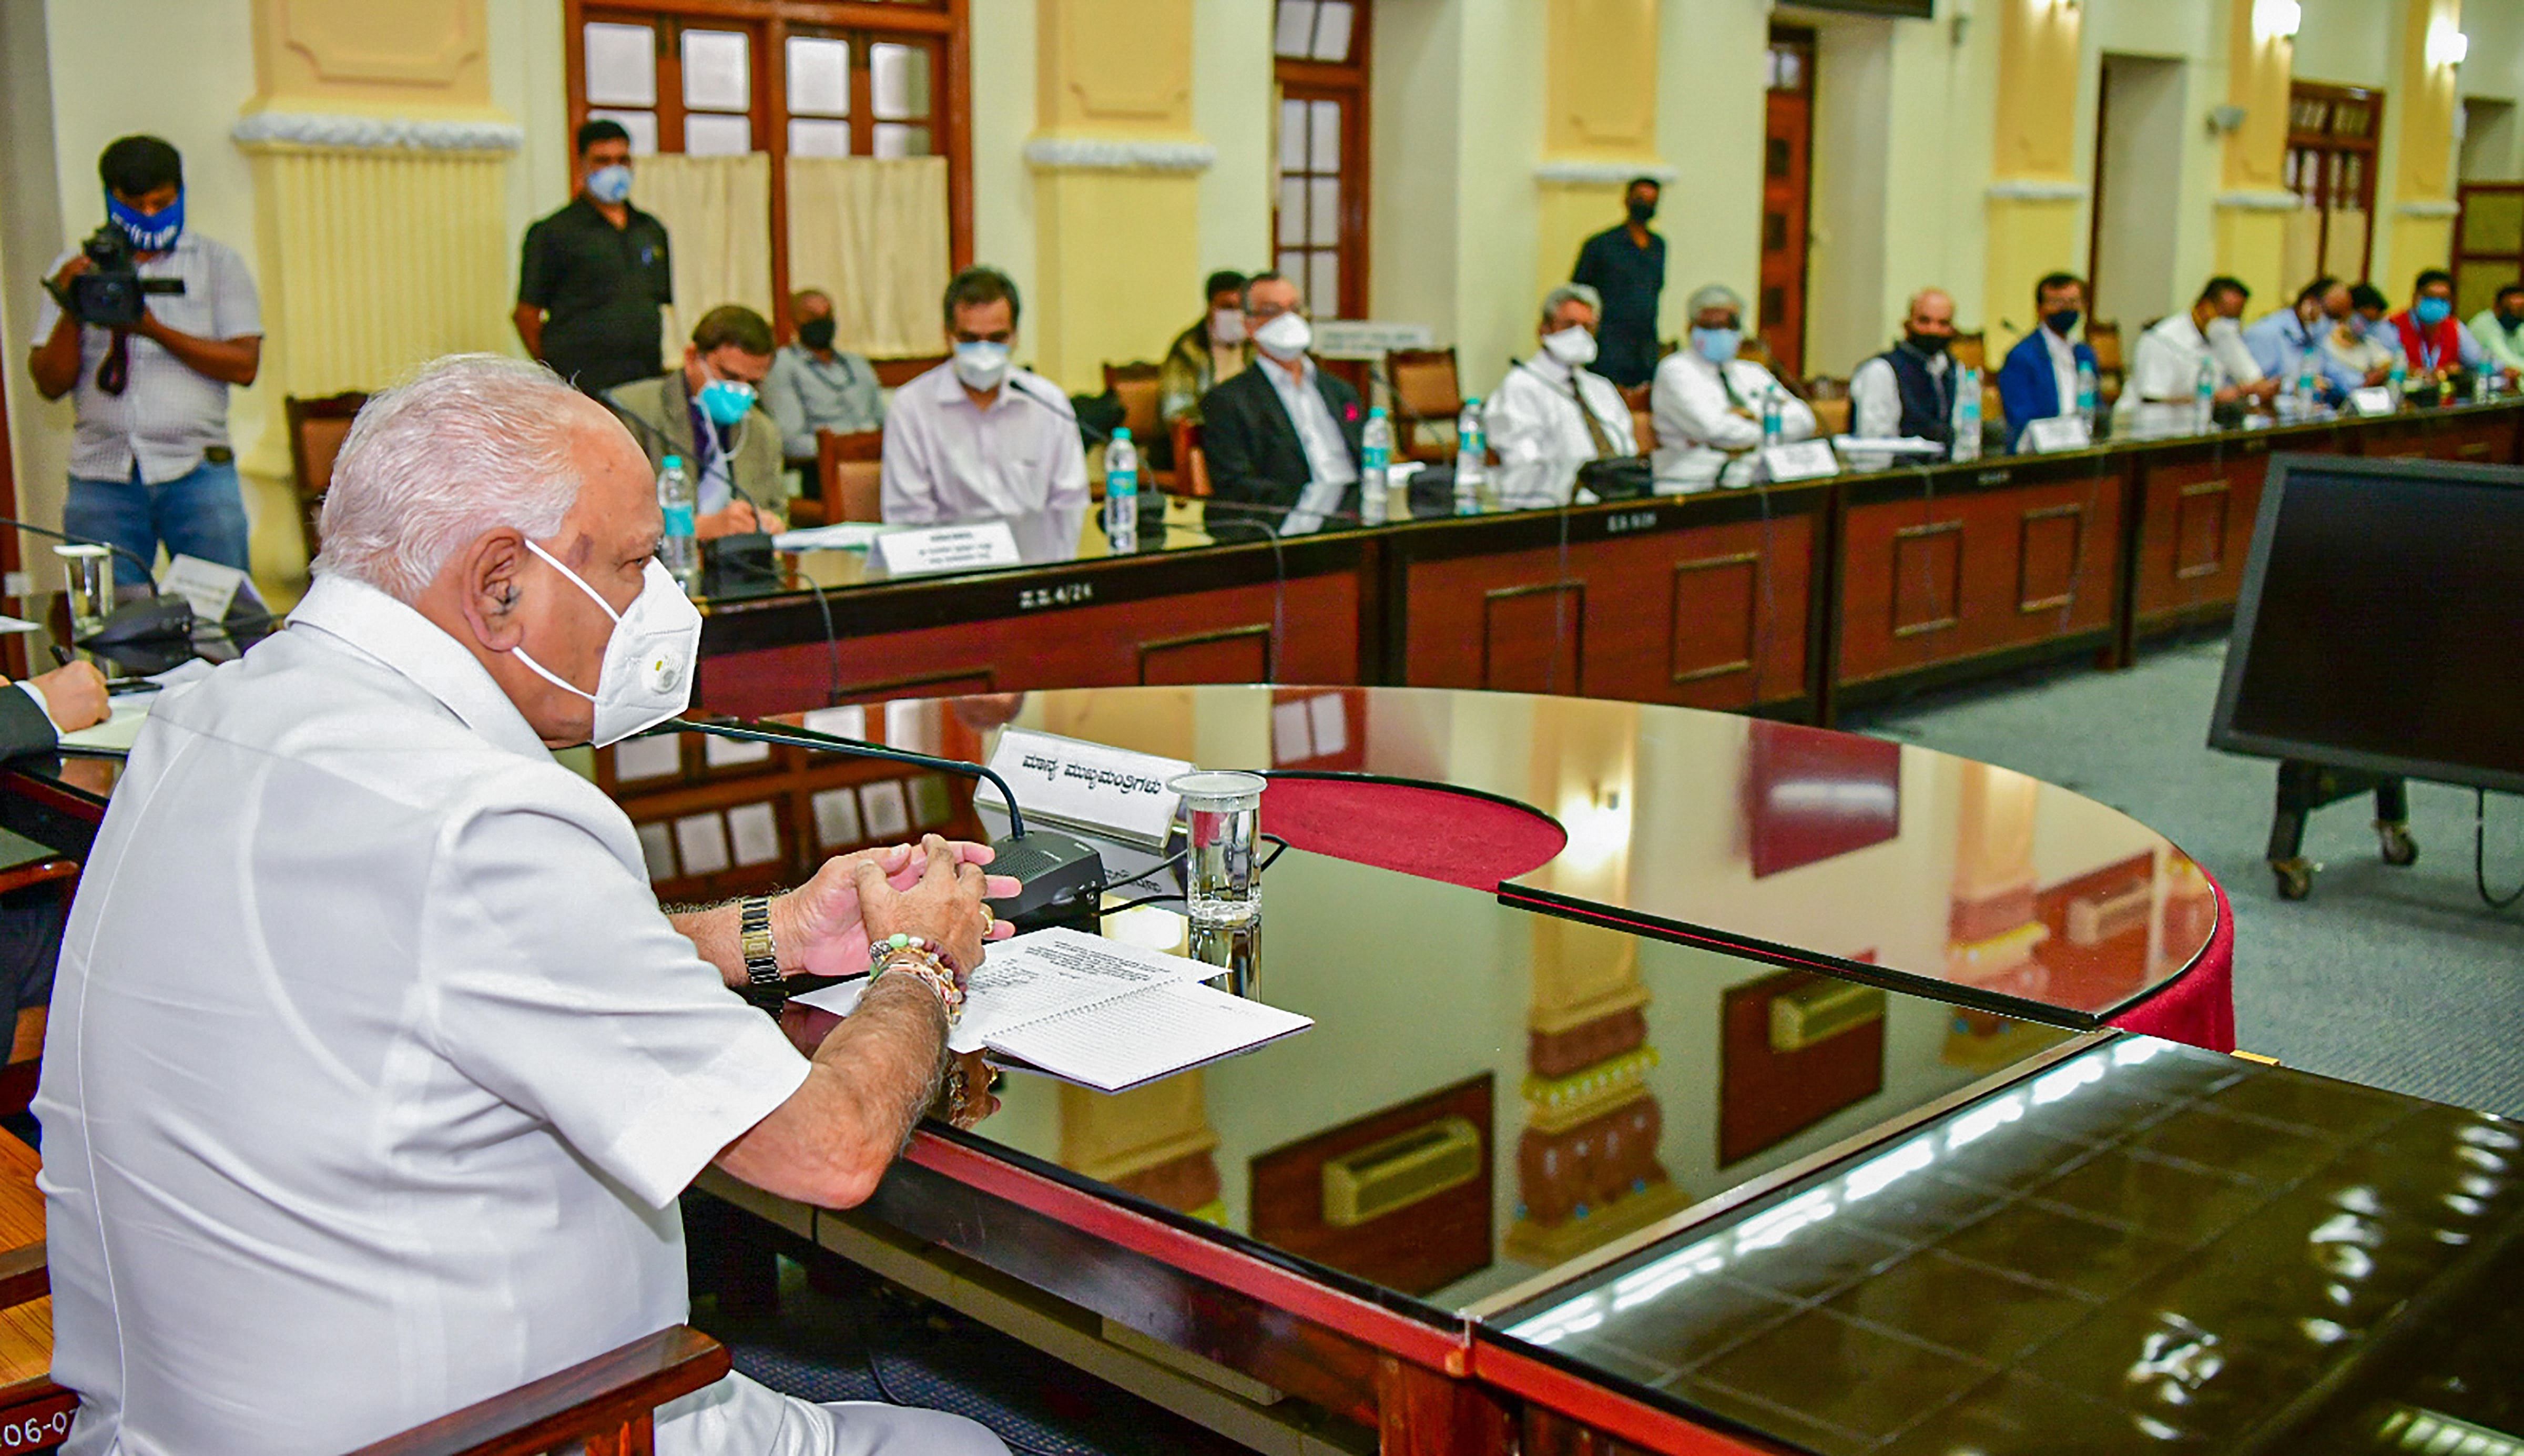 Karnataka Chief Minister B S Yediyurappa chairs a meeting with experts and senior officers to discuss ways forward in Covid-19 management, in Bengaluru, Wednesday, July 1, 2020. (PTI Photo)